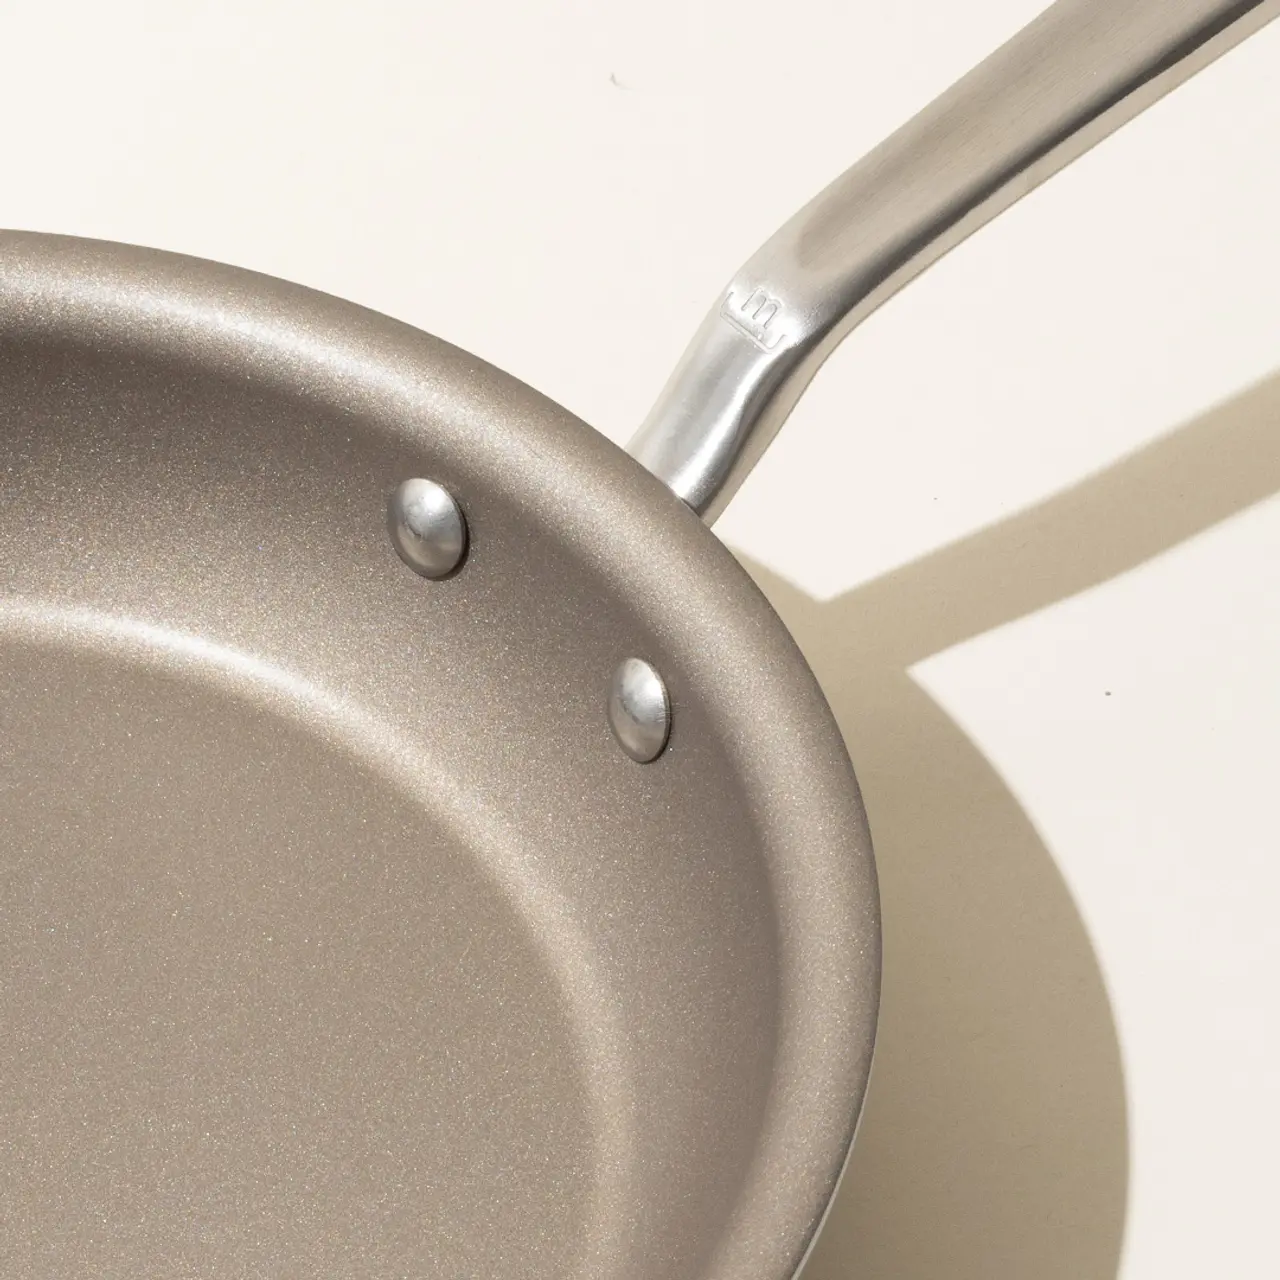 A close-up of a non-stick frying pan with a metallic handle, casting a shadow on a light surface.